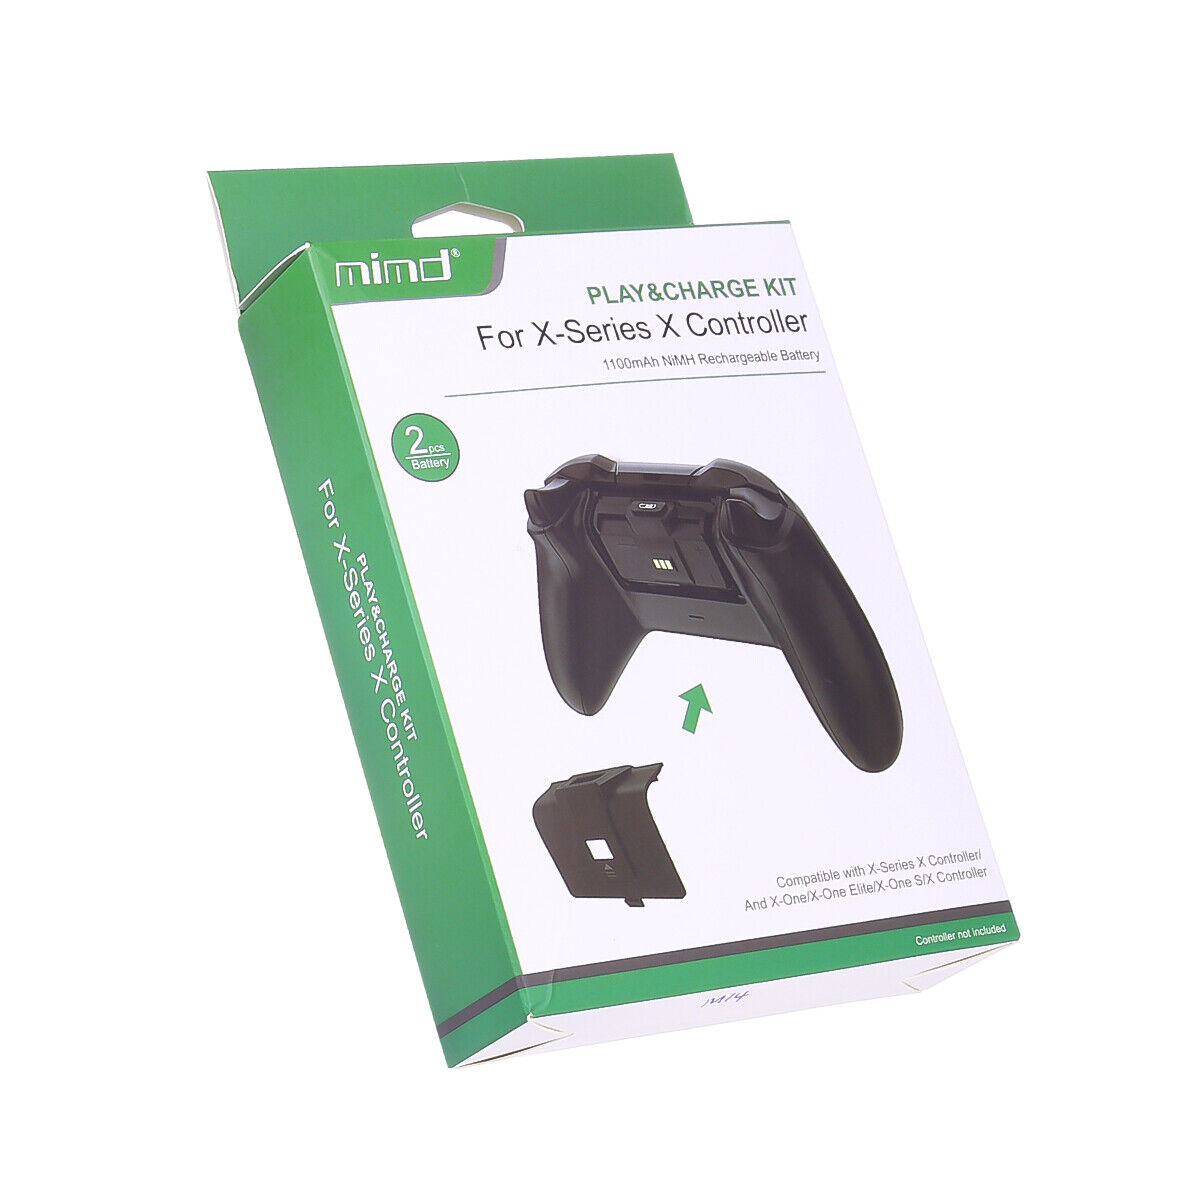 Rechargeable Battery Pack For XBox One X/S Series X/S Controller & Charger Cable EBL Does not apply - фотография #10